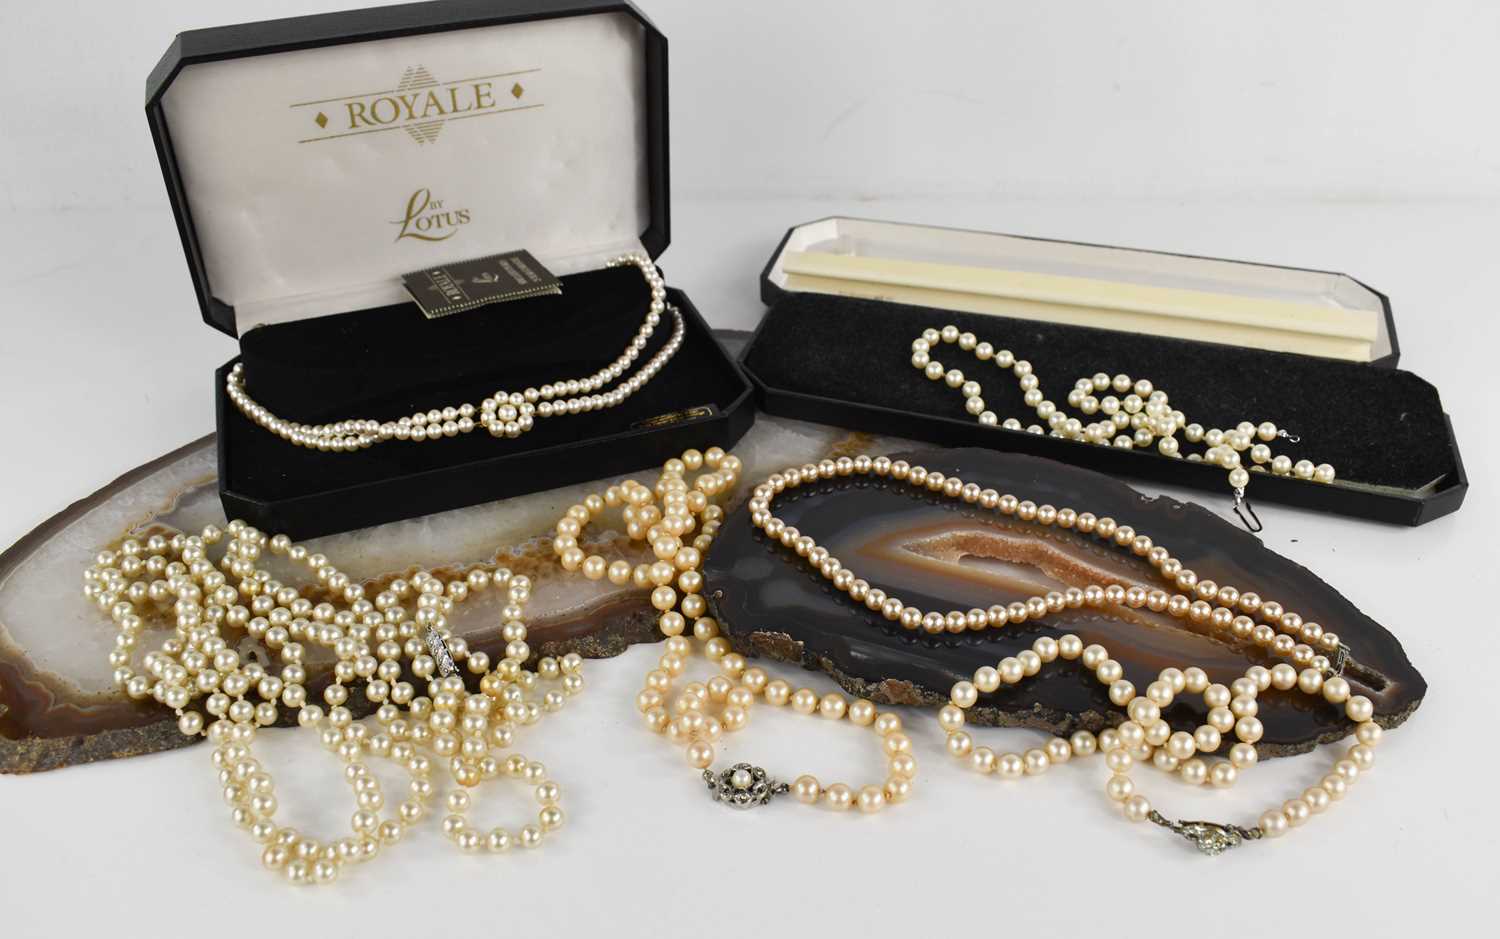 A group of pearl necklaces, including vintage examples. and one Royale by Lotus choker, in the